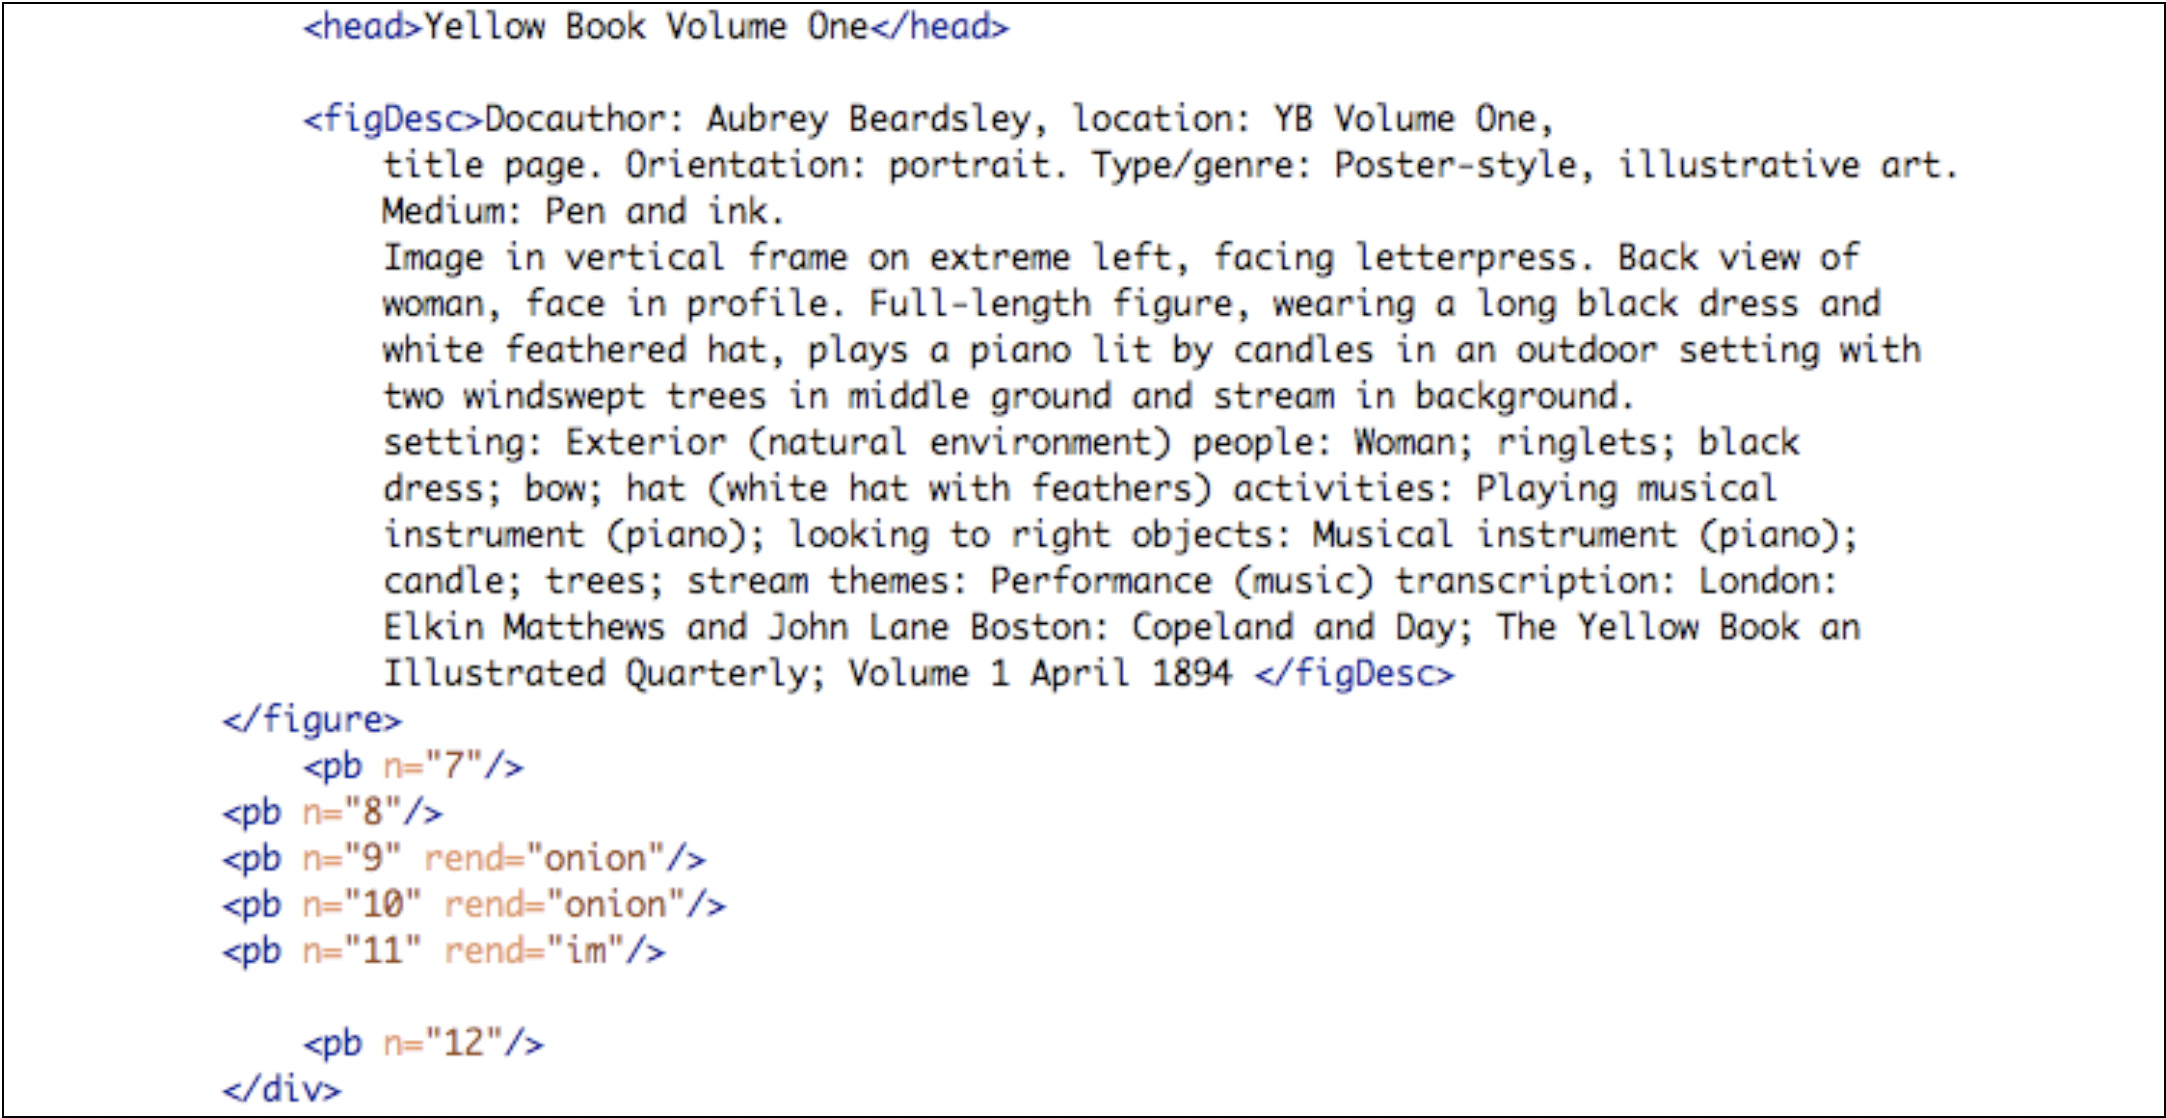 The xml version of the title page for volume 1, showing the onion page rendering.